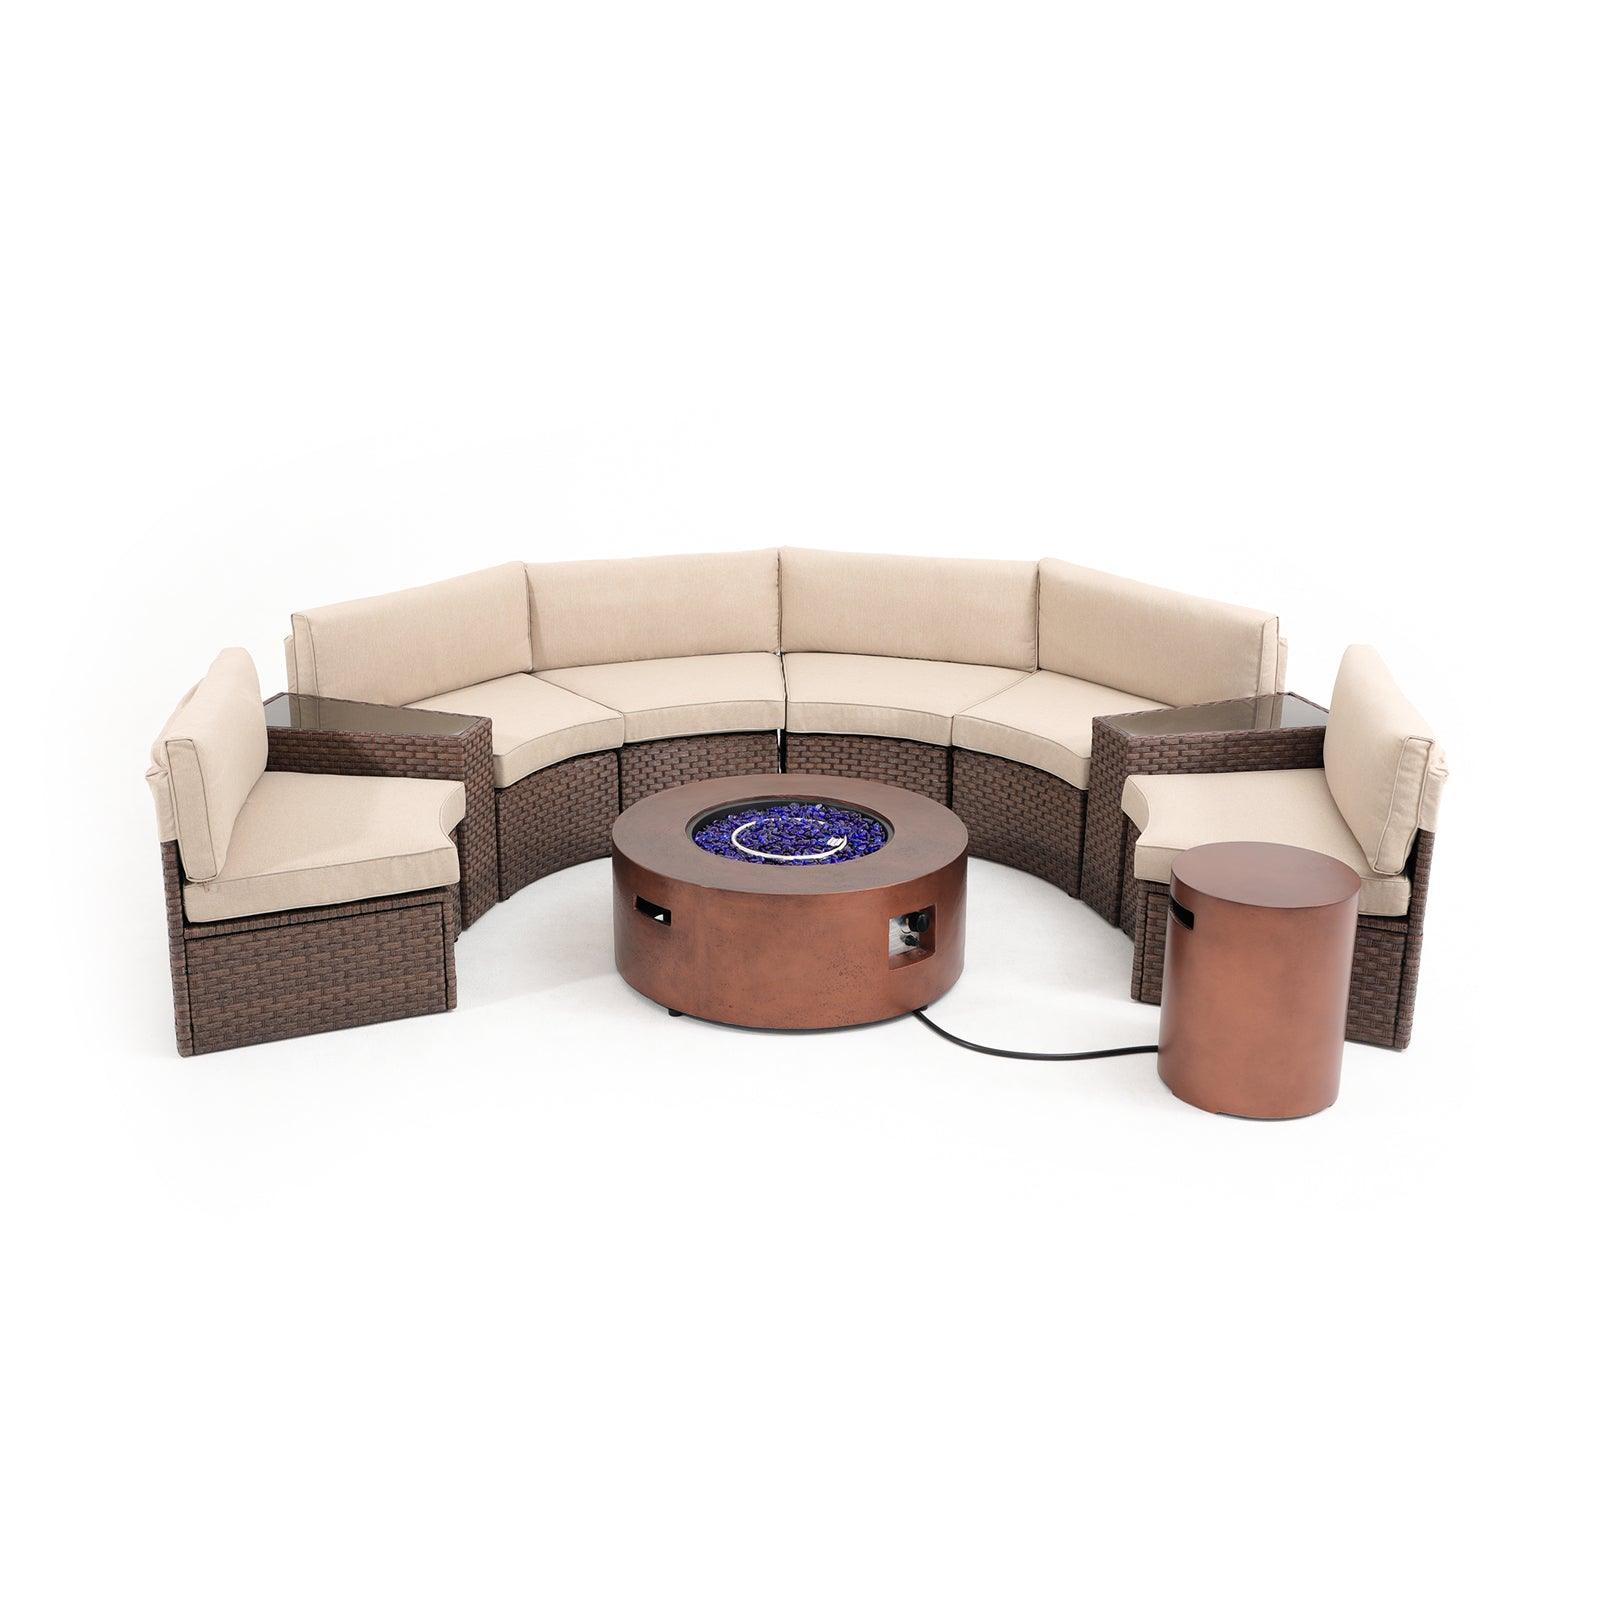 Boboli 6-seater brown Wicker Curved Sectional sofas with beige cushions + 2 side tables + 1 brown Propane Fire Pit with tank holder, front view - Jardina Furniture #color_Brown #piece_9-pc.